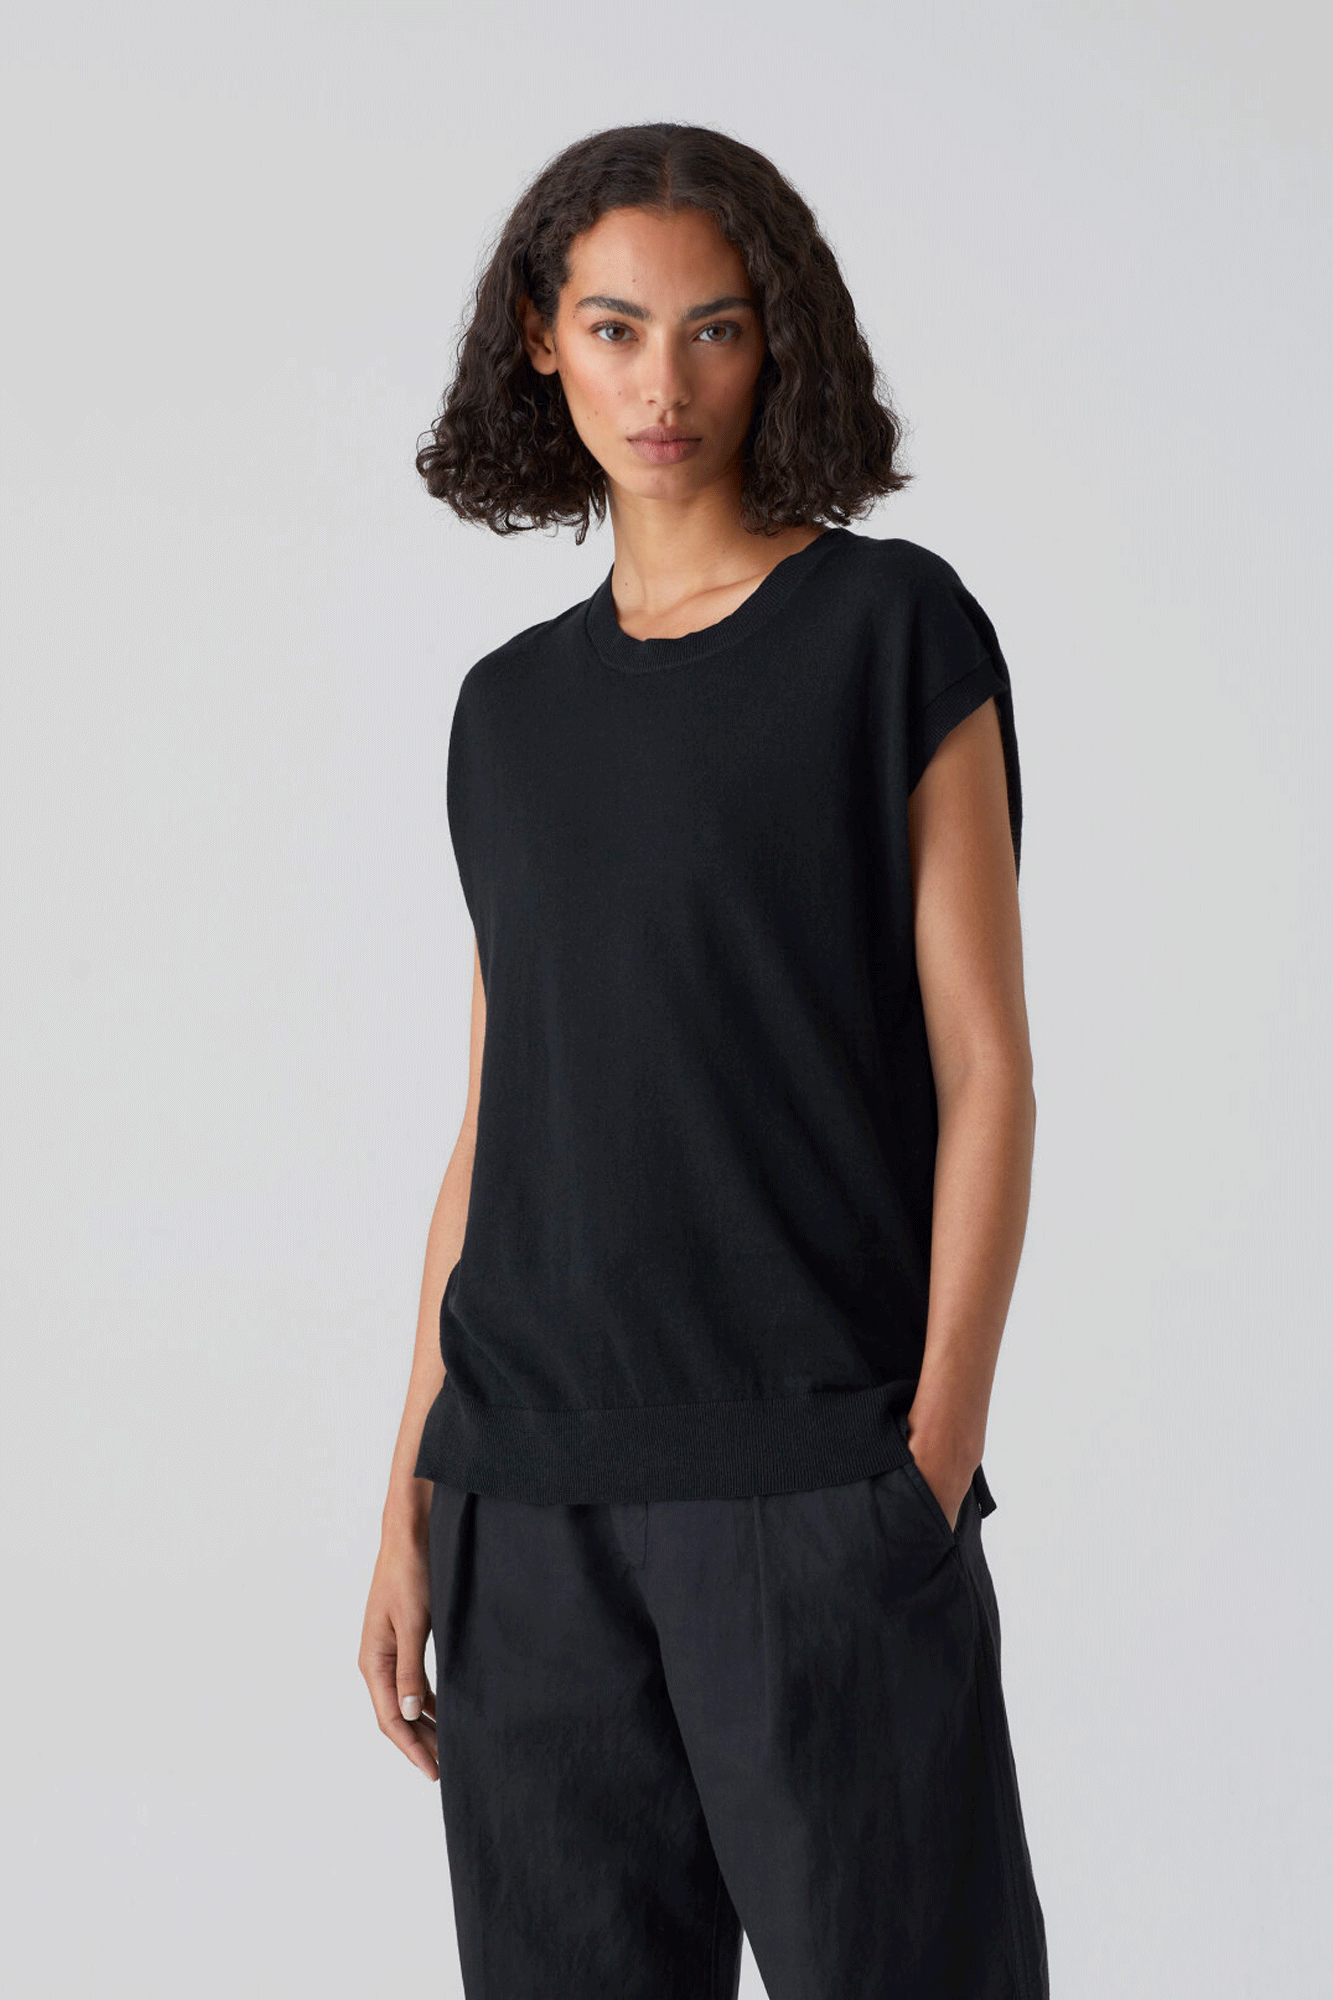 The Sleeveless Top from Closed is a fine knit sweater vest made of a soft linen and cotton mix. Ribbed round neckline, sleeve cuffs and hem.